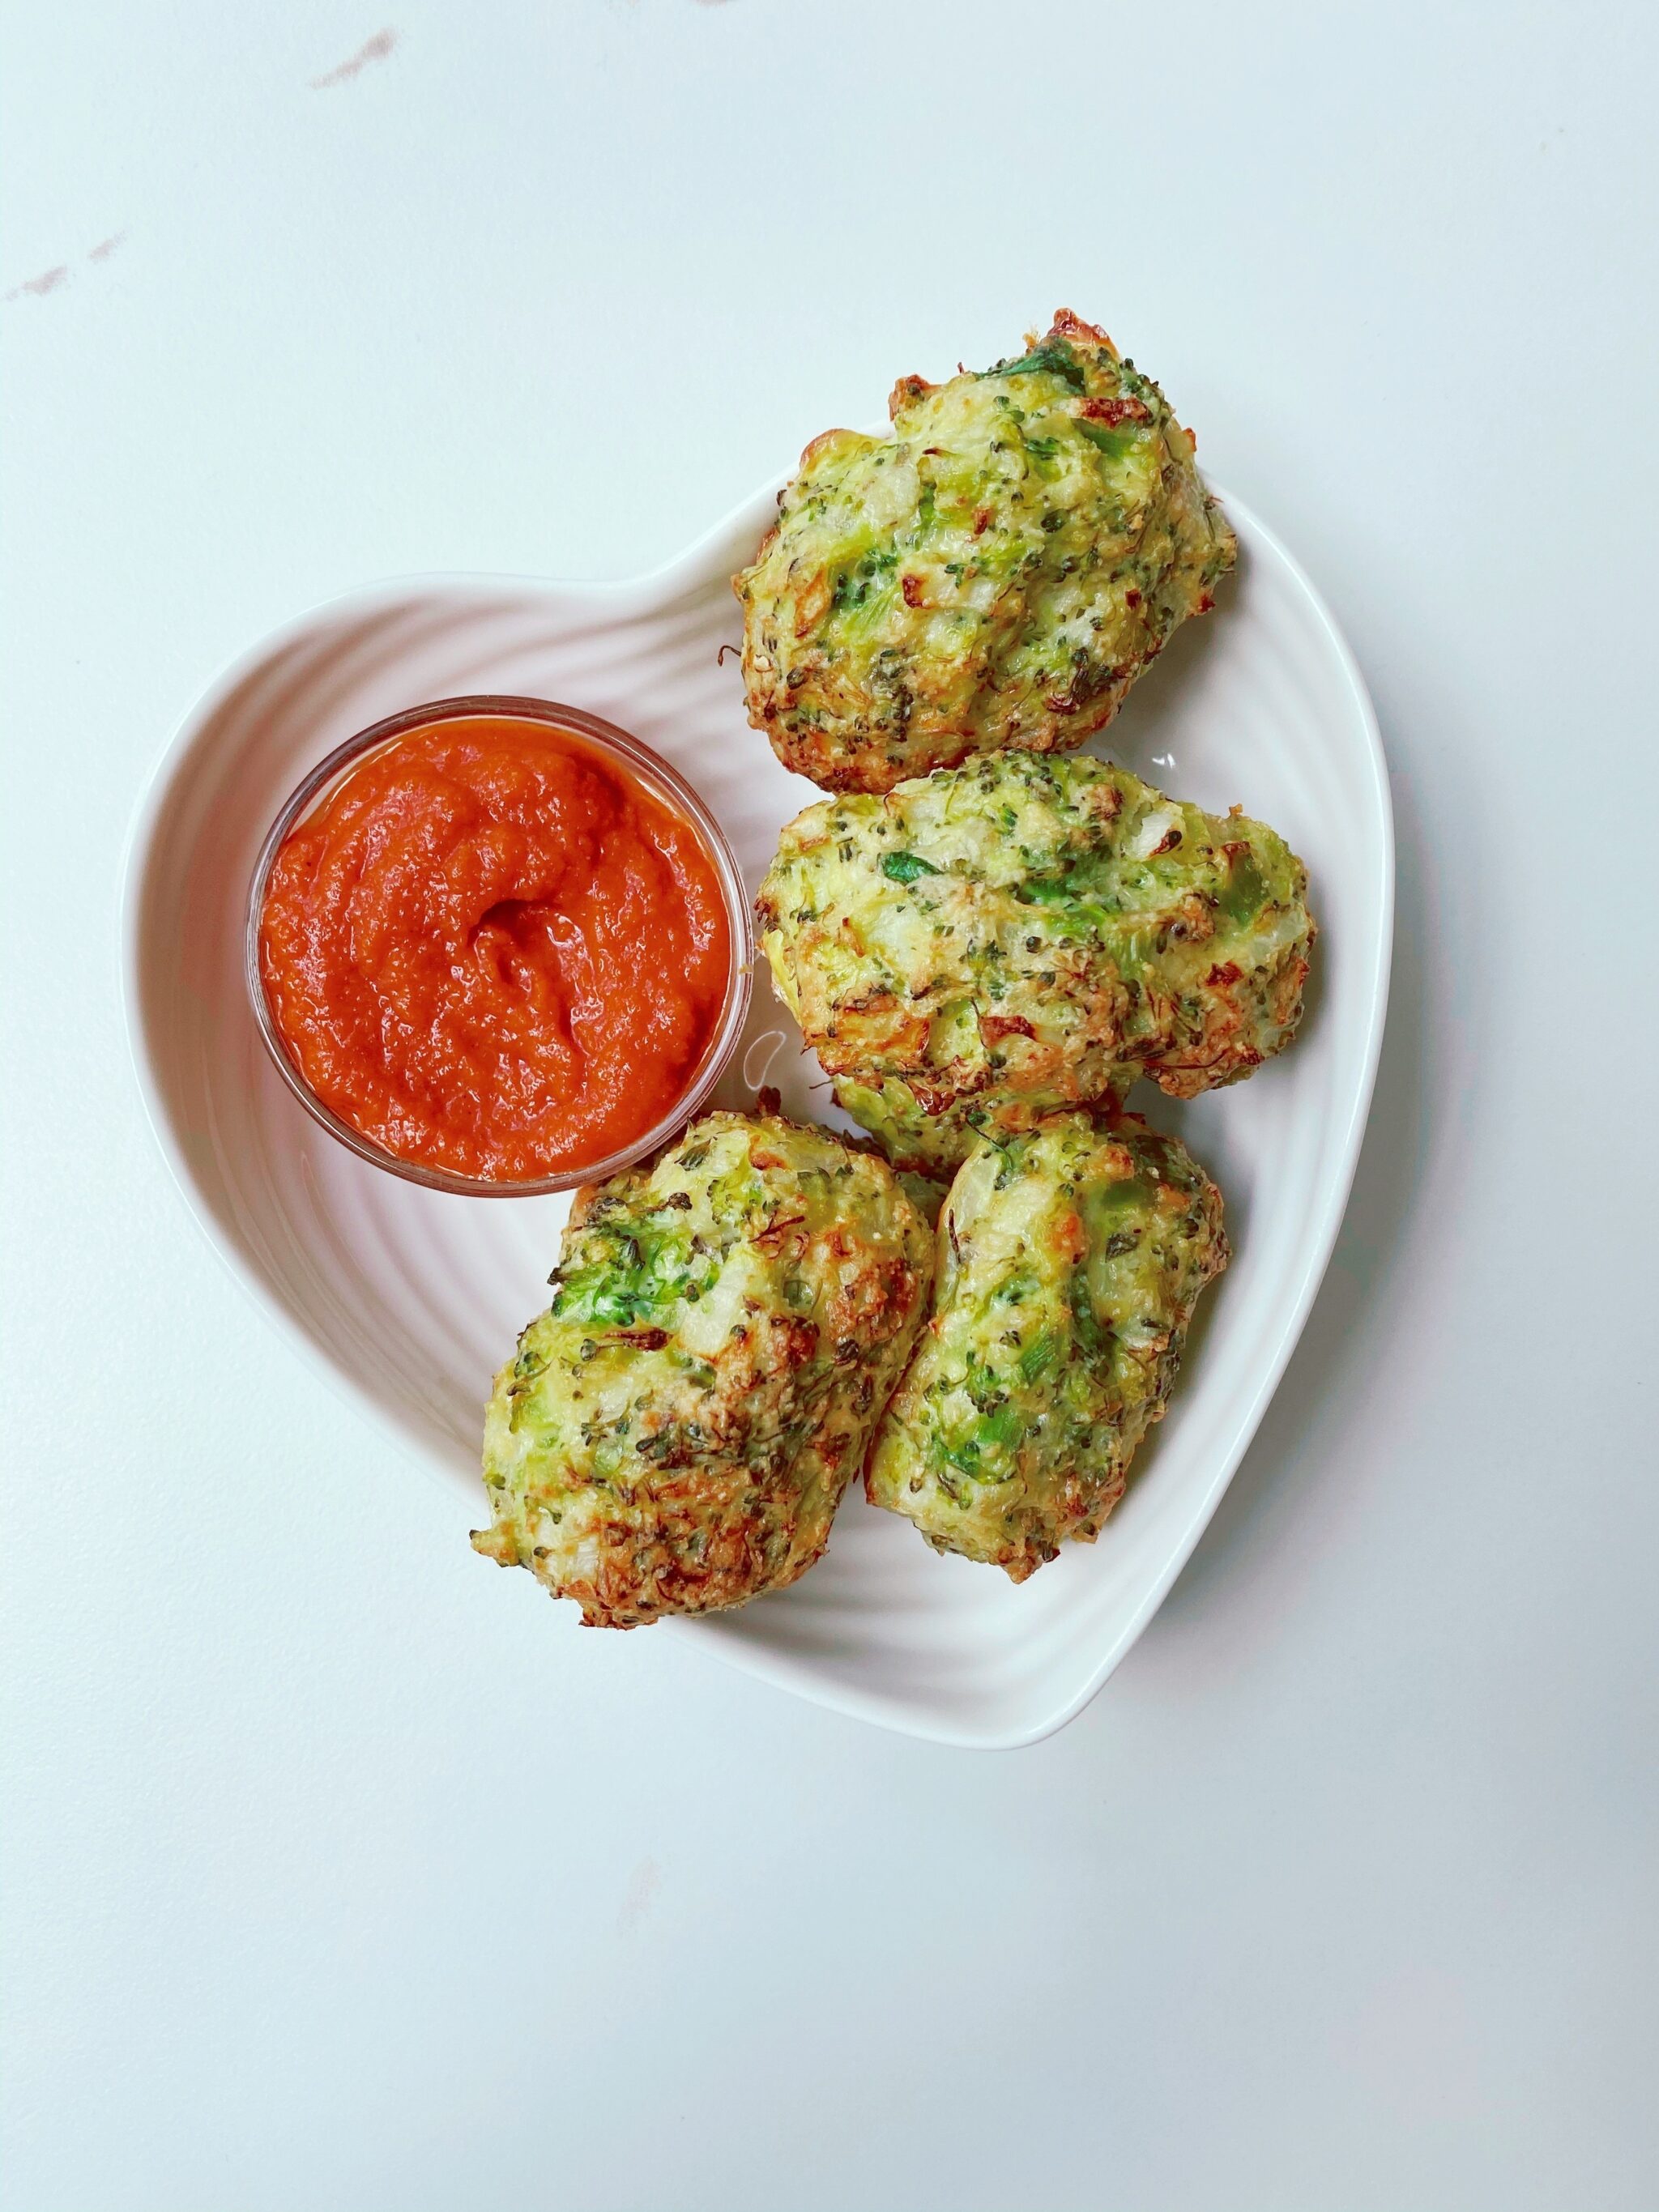 Broccoli bites with cheese